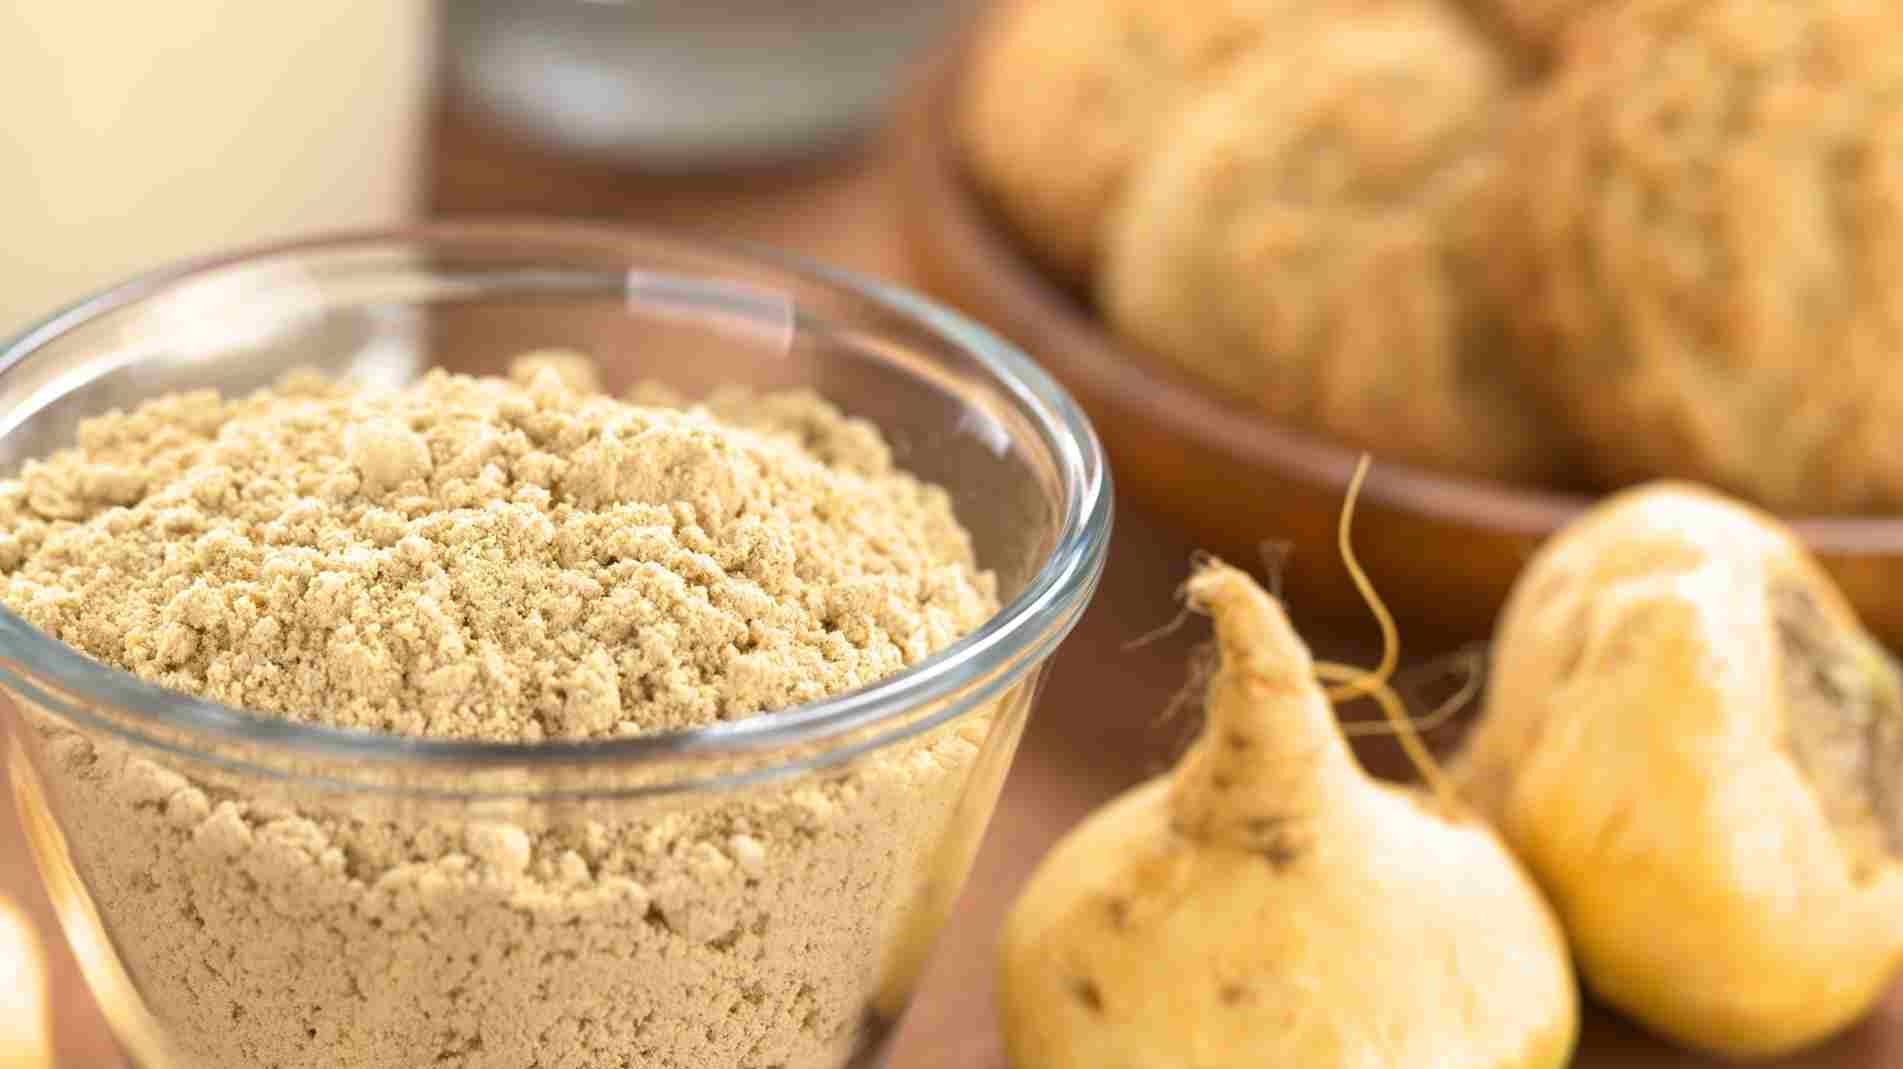 How to Grow your own Maca Root in containers